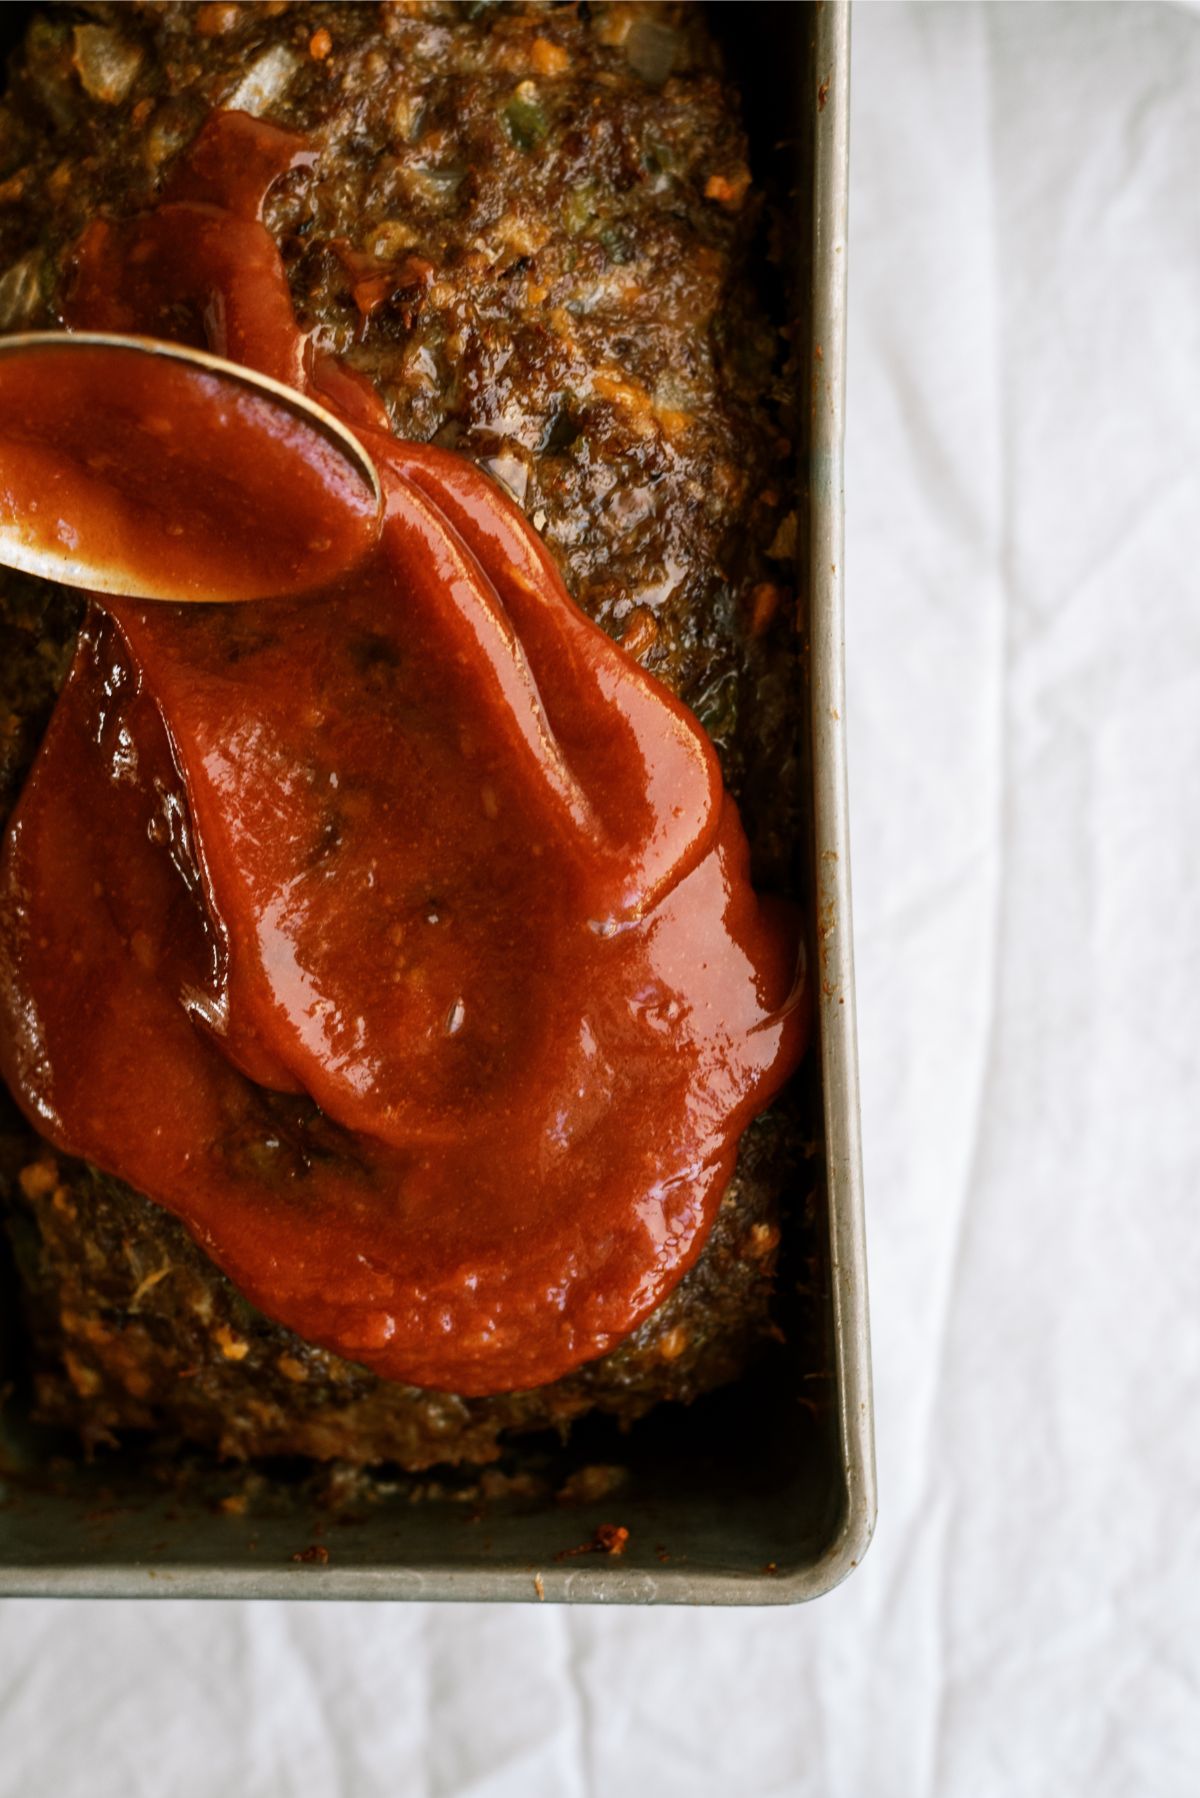 Spreading sauce on top of baked meatloaf